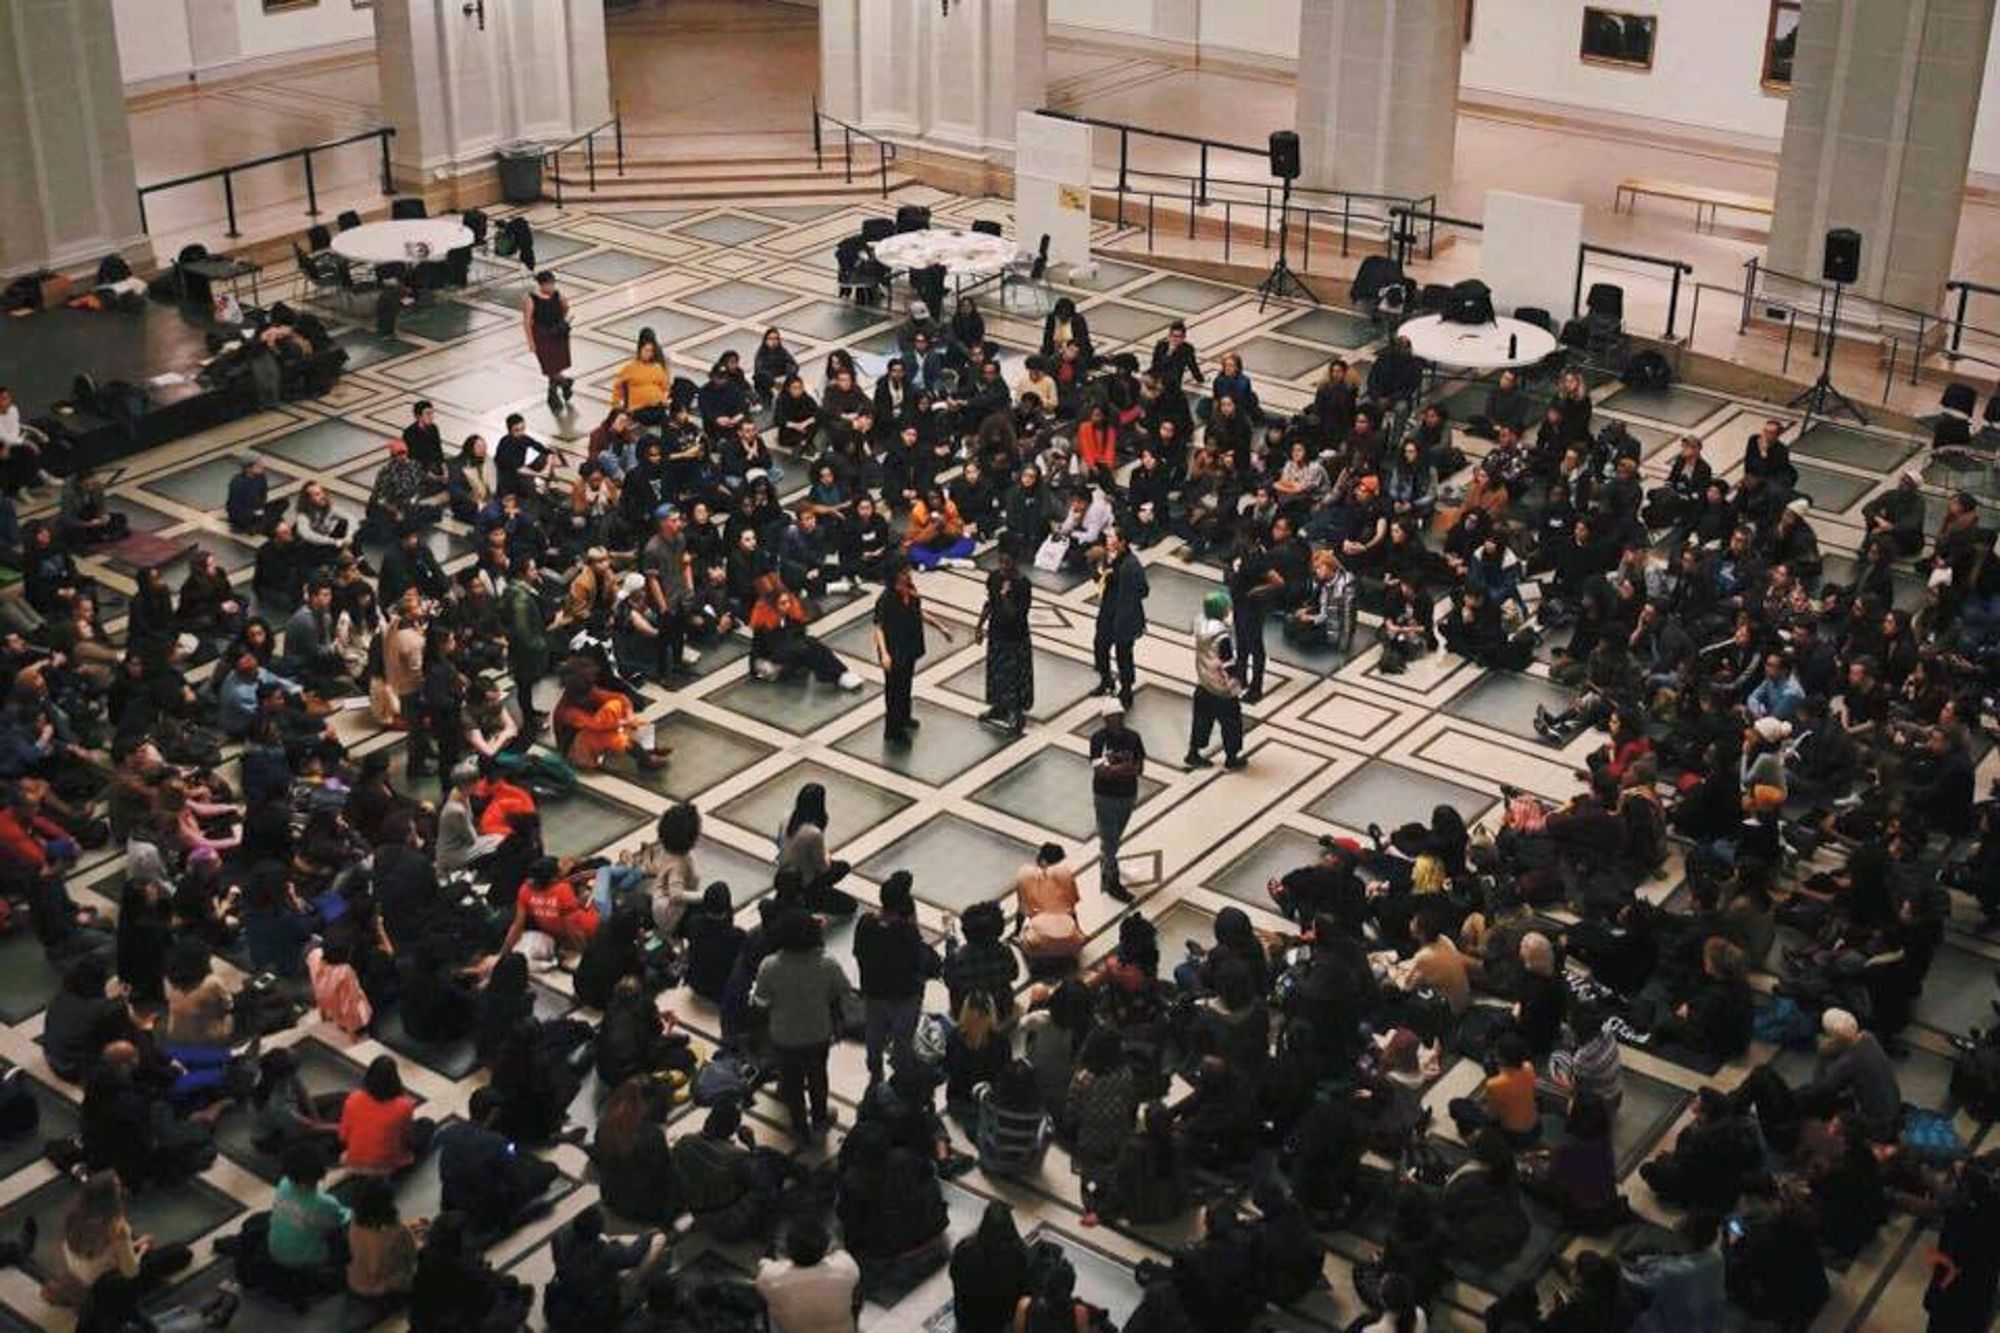 Process Mourn Activate - Post Trump Election Community Meeting - 2016 BUFU (group of people overhead shot)